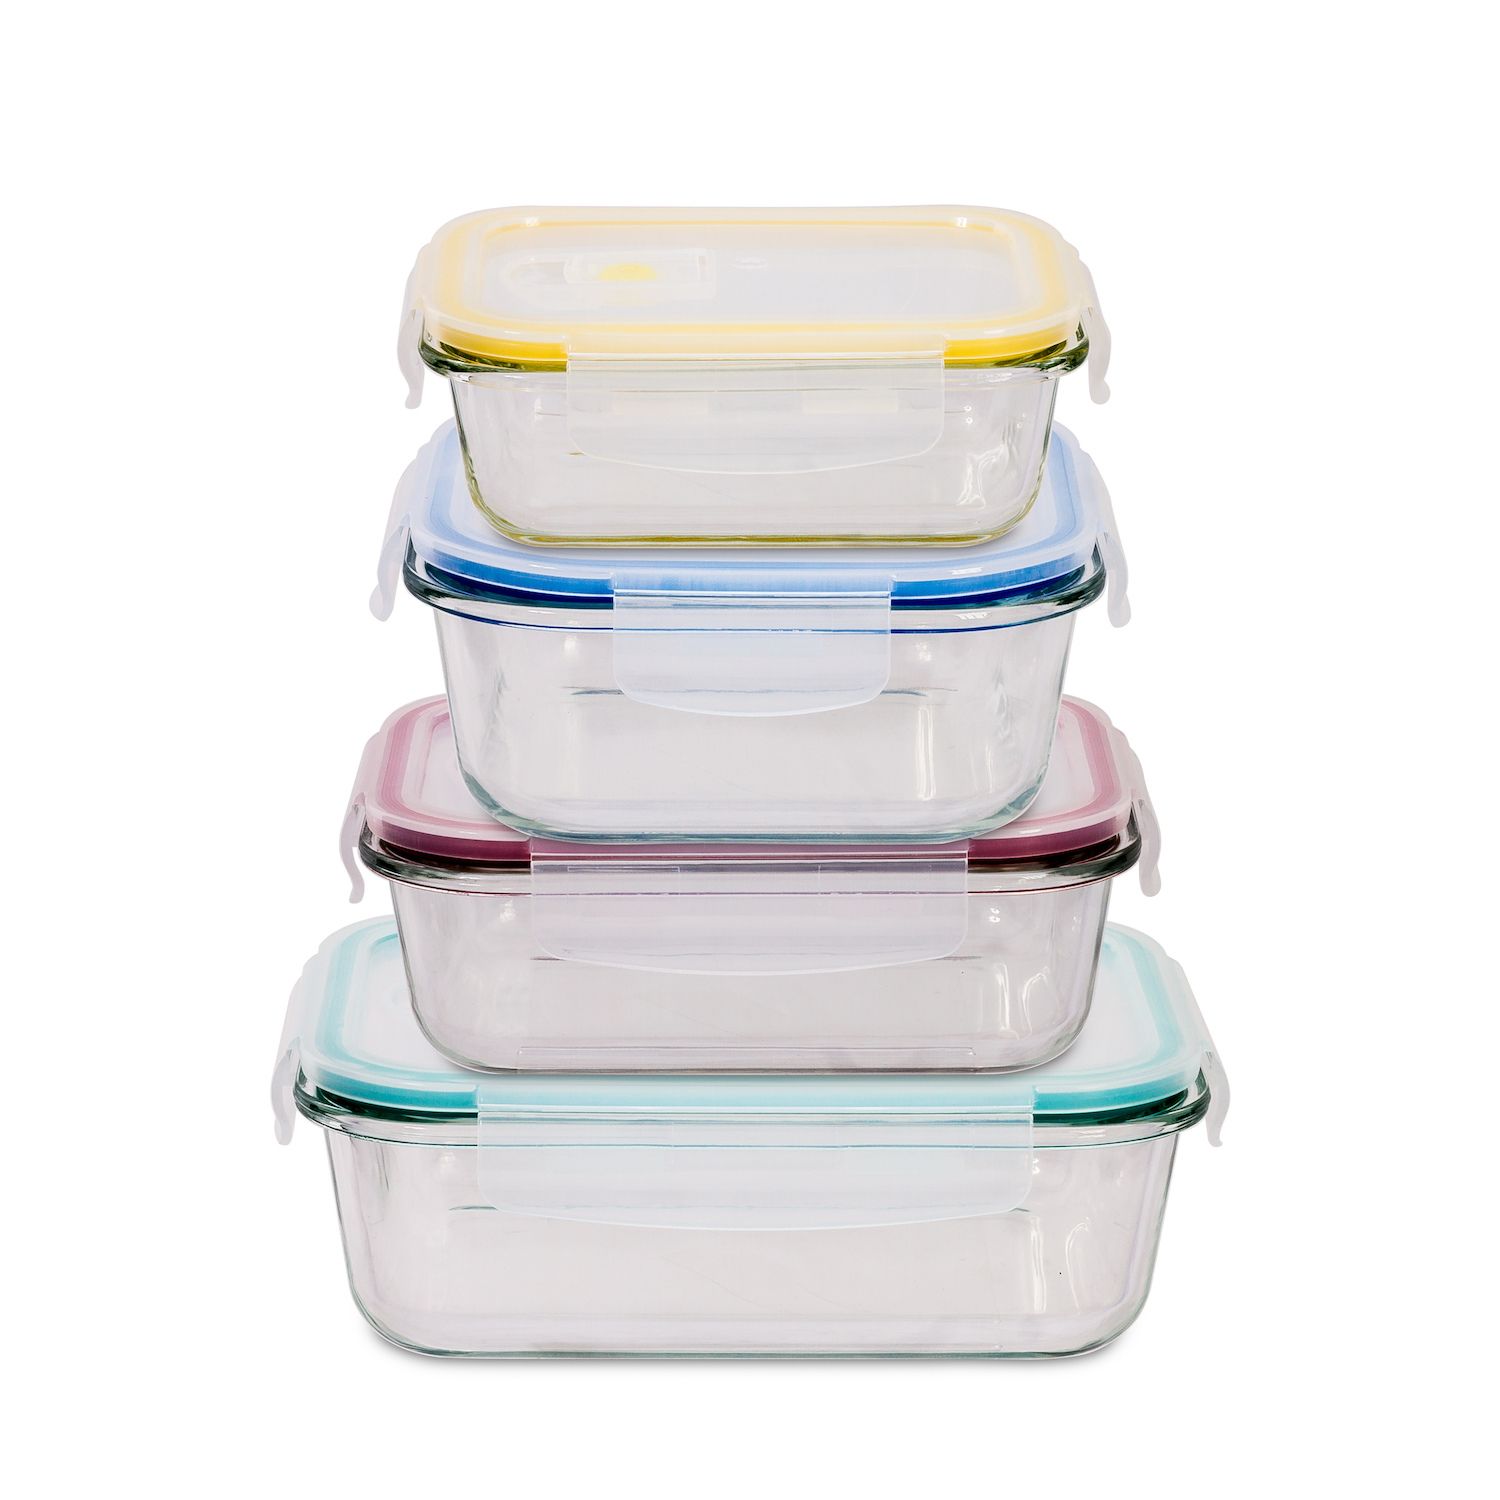 Nutrichef 10-Piece Glass Food Storage Containers with Blue Lid